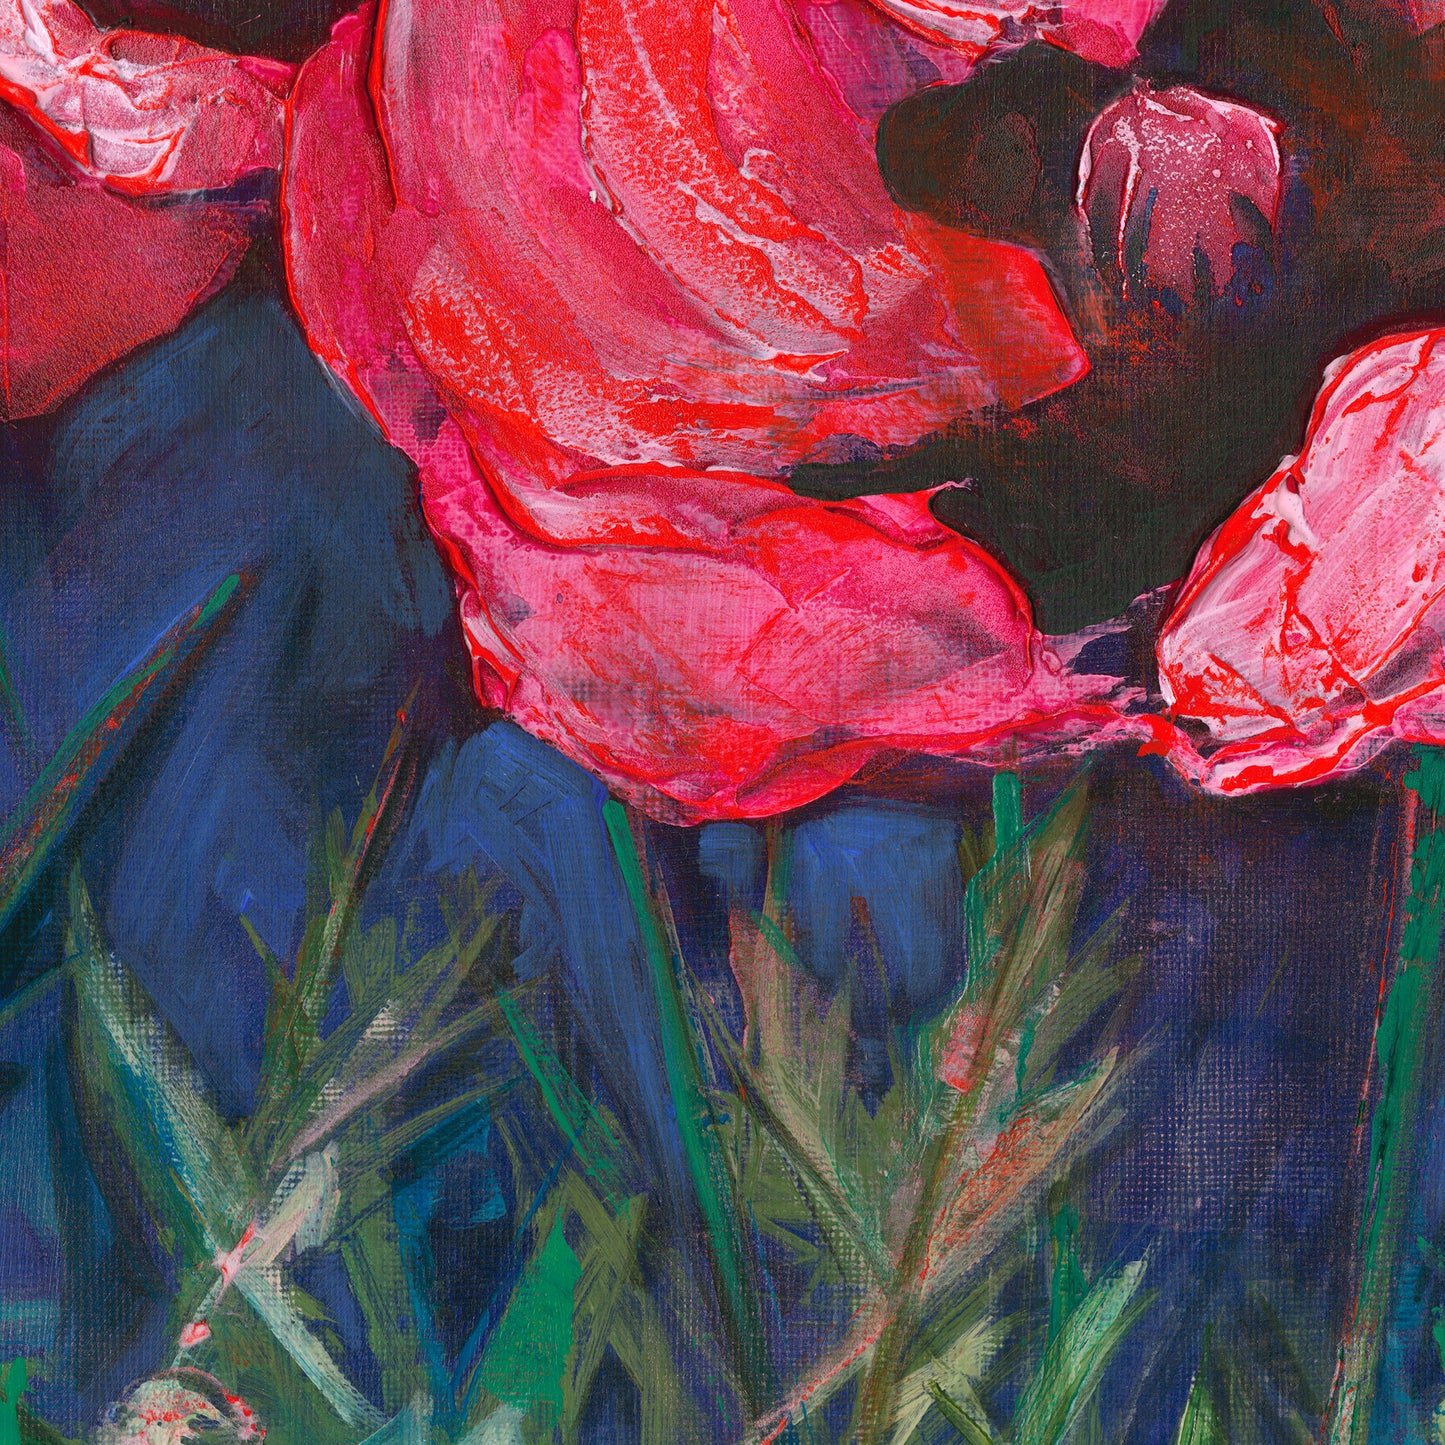 Detail of a  square print of a painting in textural paint of red poppies on a dark midnight blue background with green foliage.